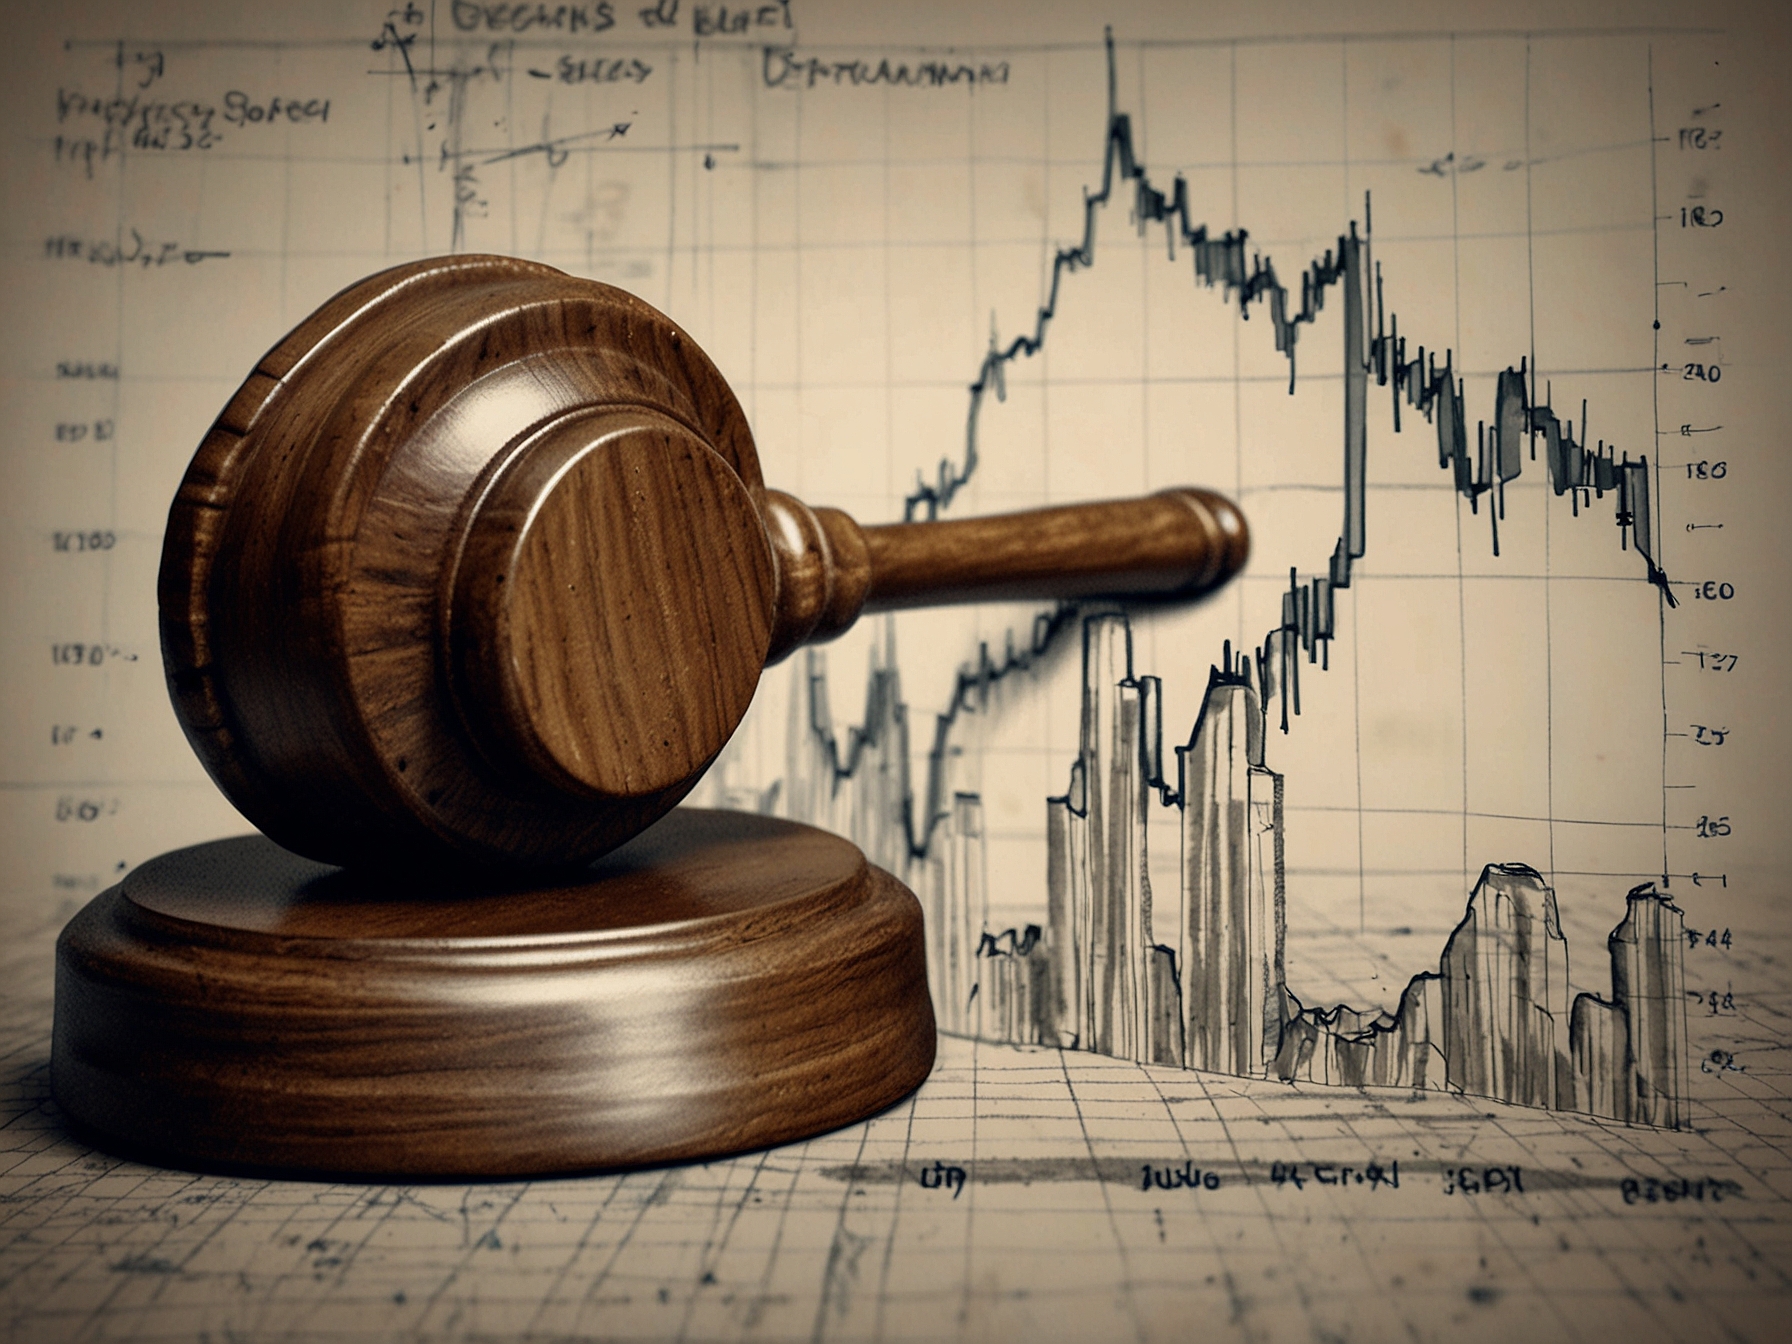 Illustration of a judge's gavel alongside a graph depicting a significant drop in stock prices, representing the legal action against Talis Biomedical Corporation for securities fraud.